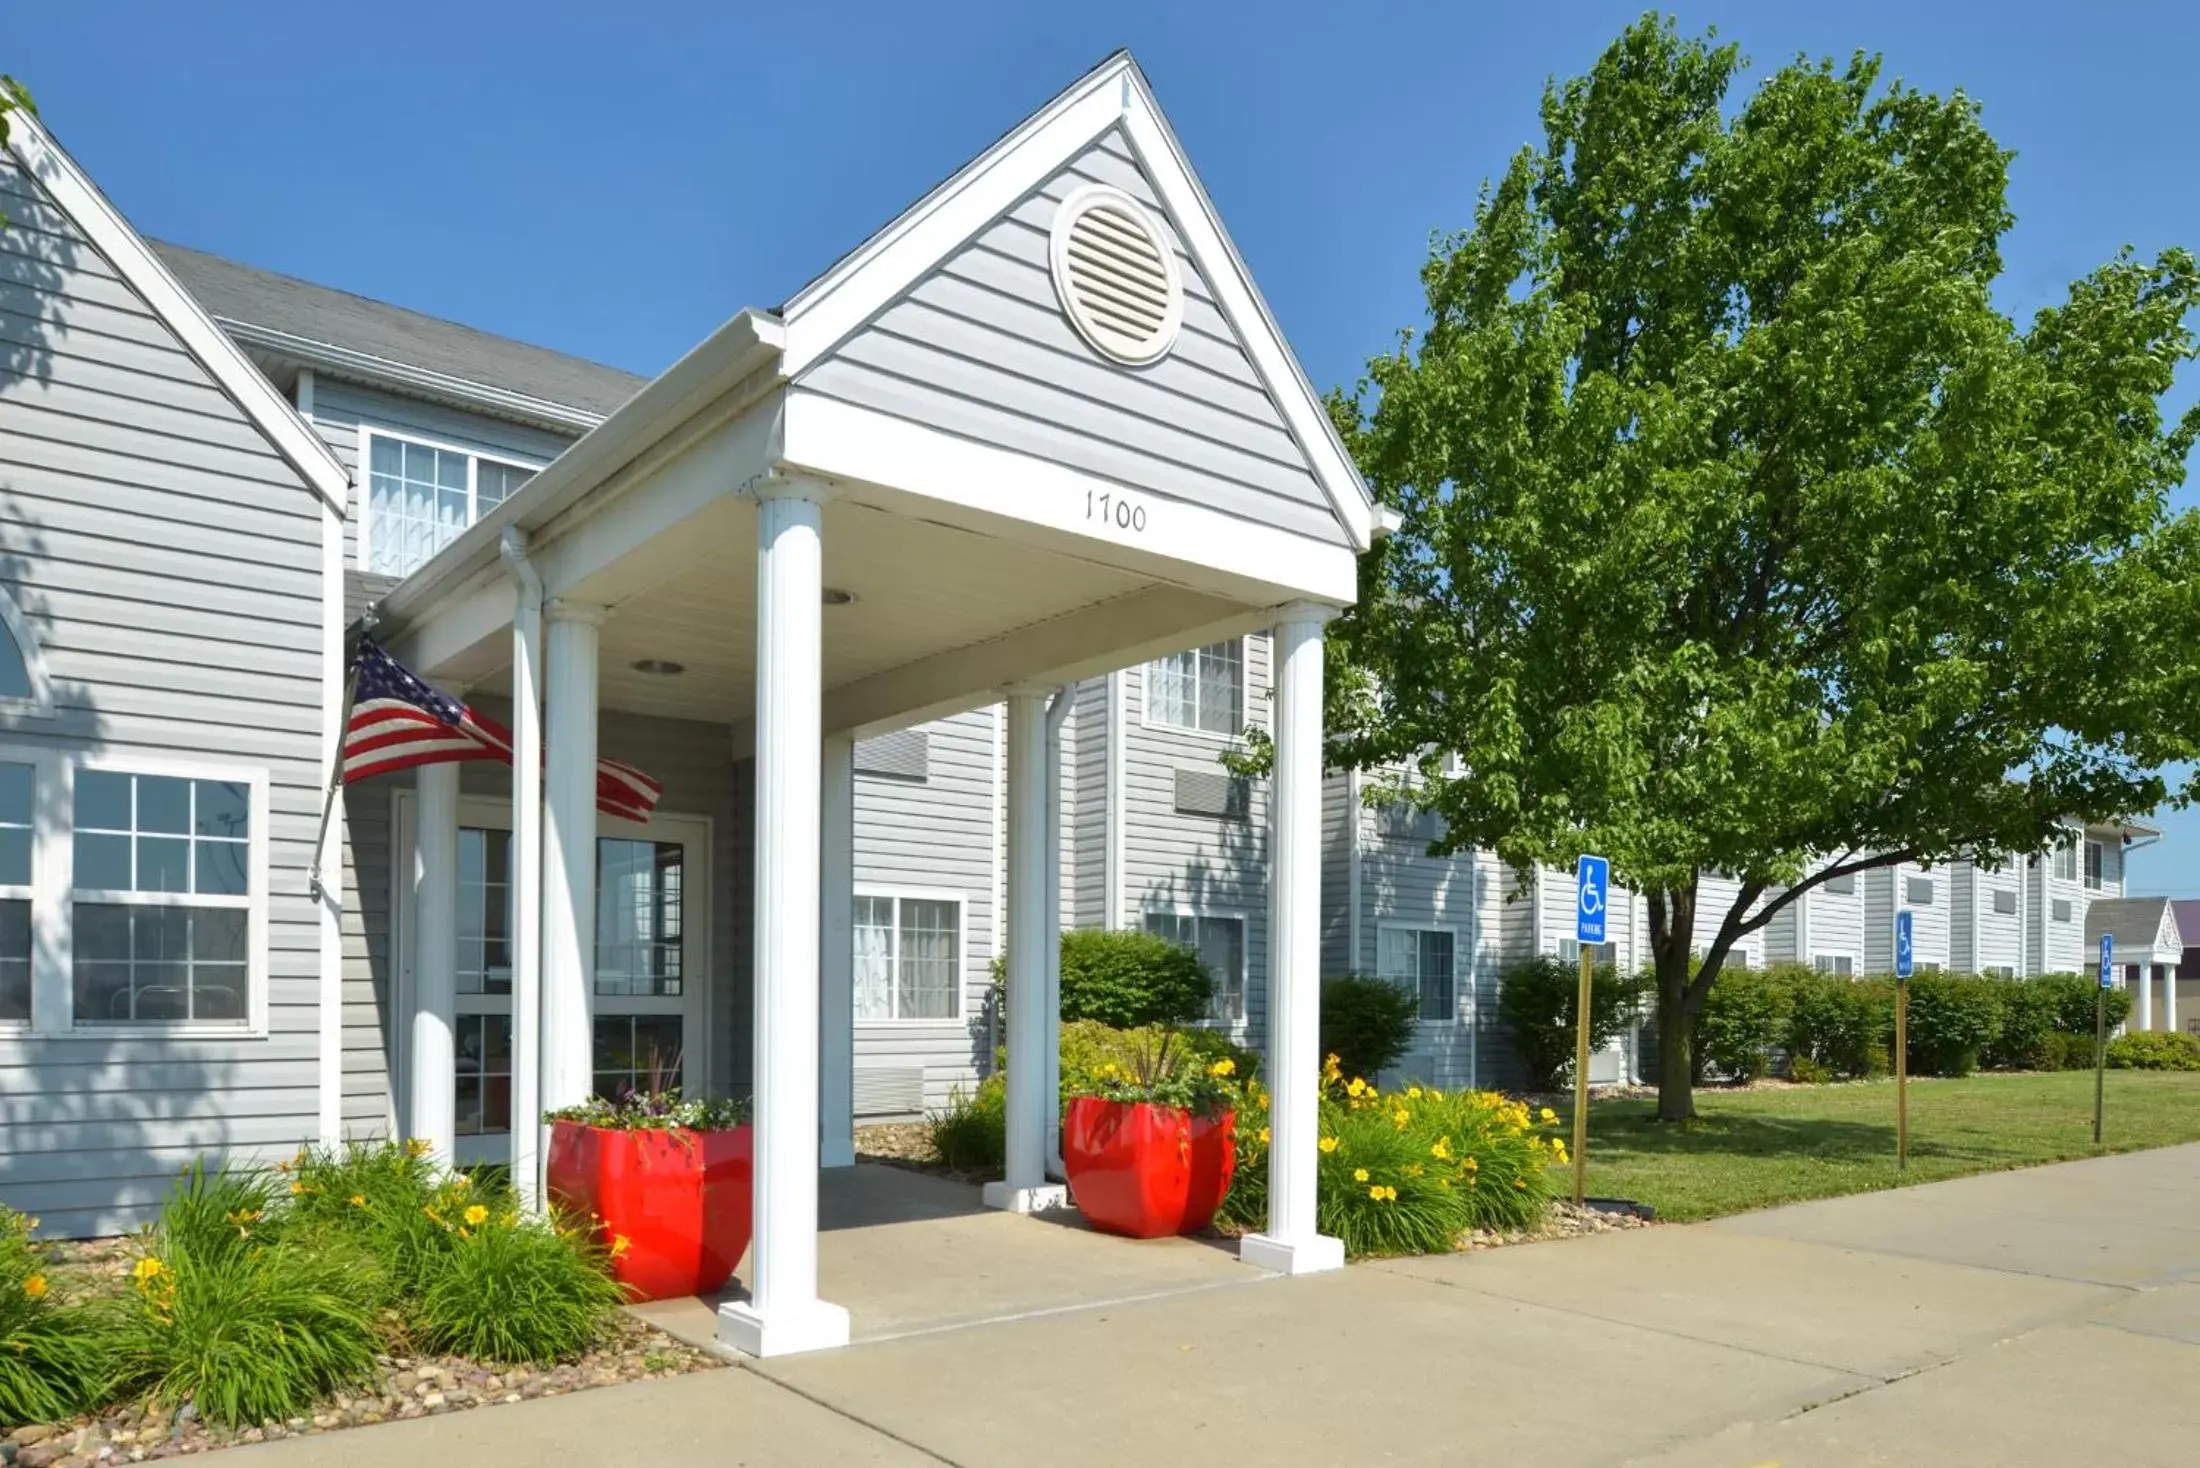 Facade/entrance, Property Building in Americas Best Value Inn & Suites Maryville